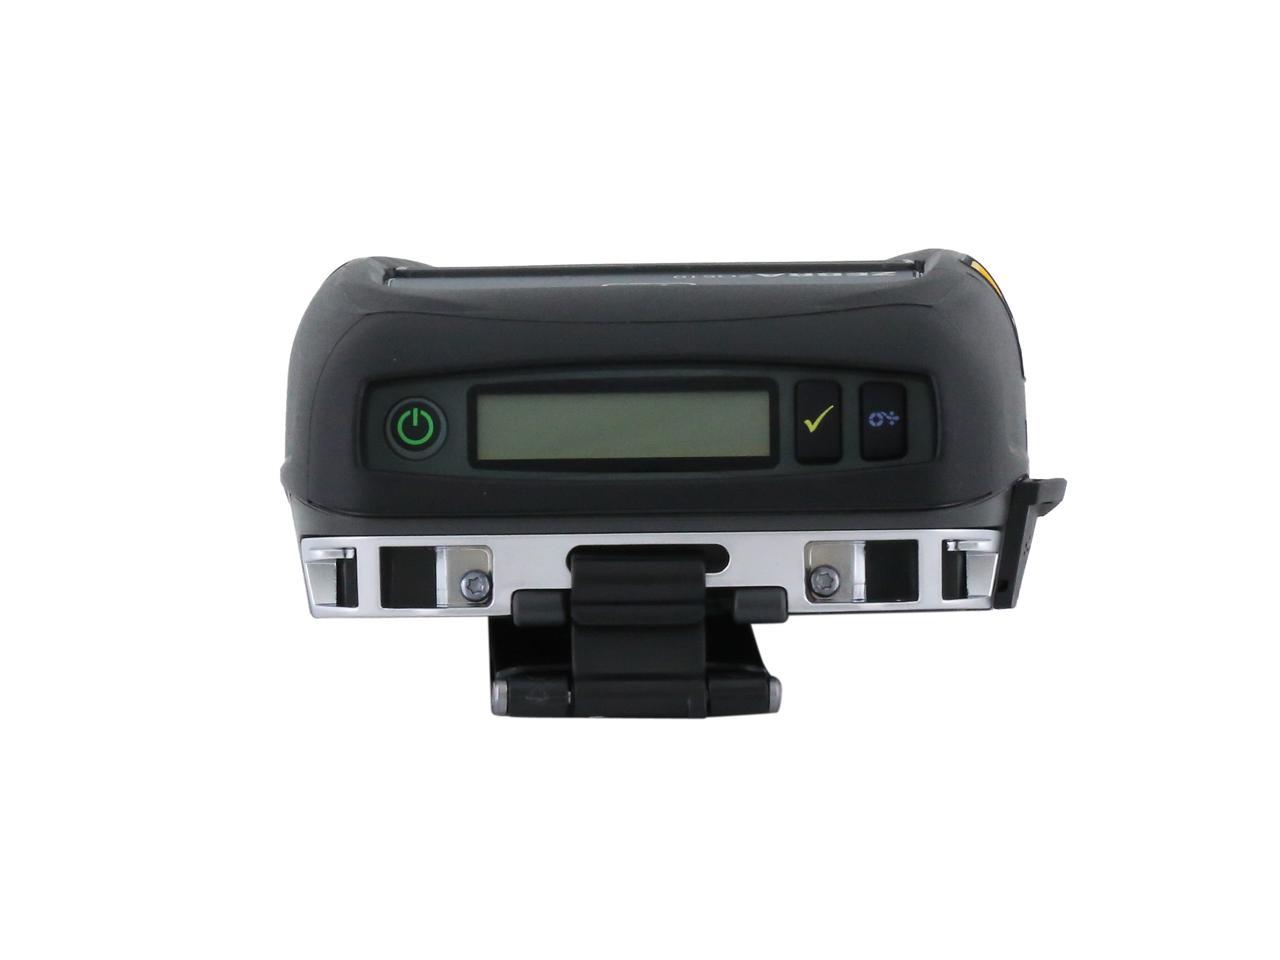 Zebra Zq510 3 Mobile Direct Thermal Receipt And Label Printer 203 Dpi Bluetooth 40 Linered 6534